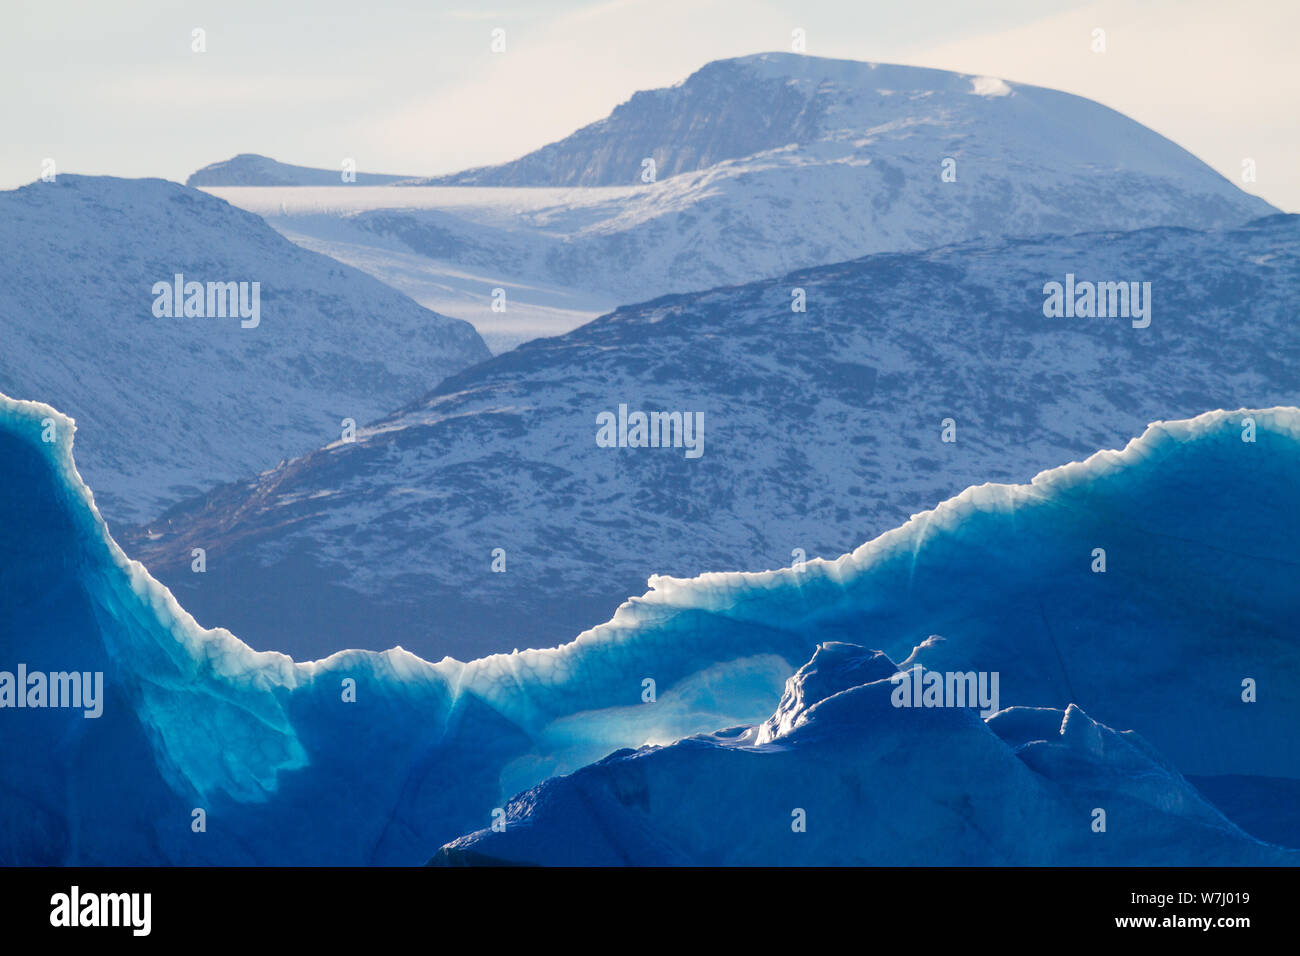 Exploring Scoresbysund by zodiac provided an opportunity to get up close and personal with the towering icebergs. The edges, thinning, allow more light to penetrate, highlighting the cells of ice within. Stock Photo